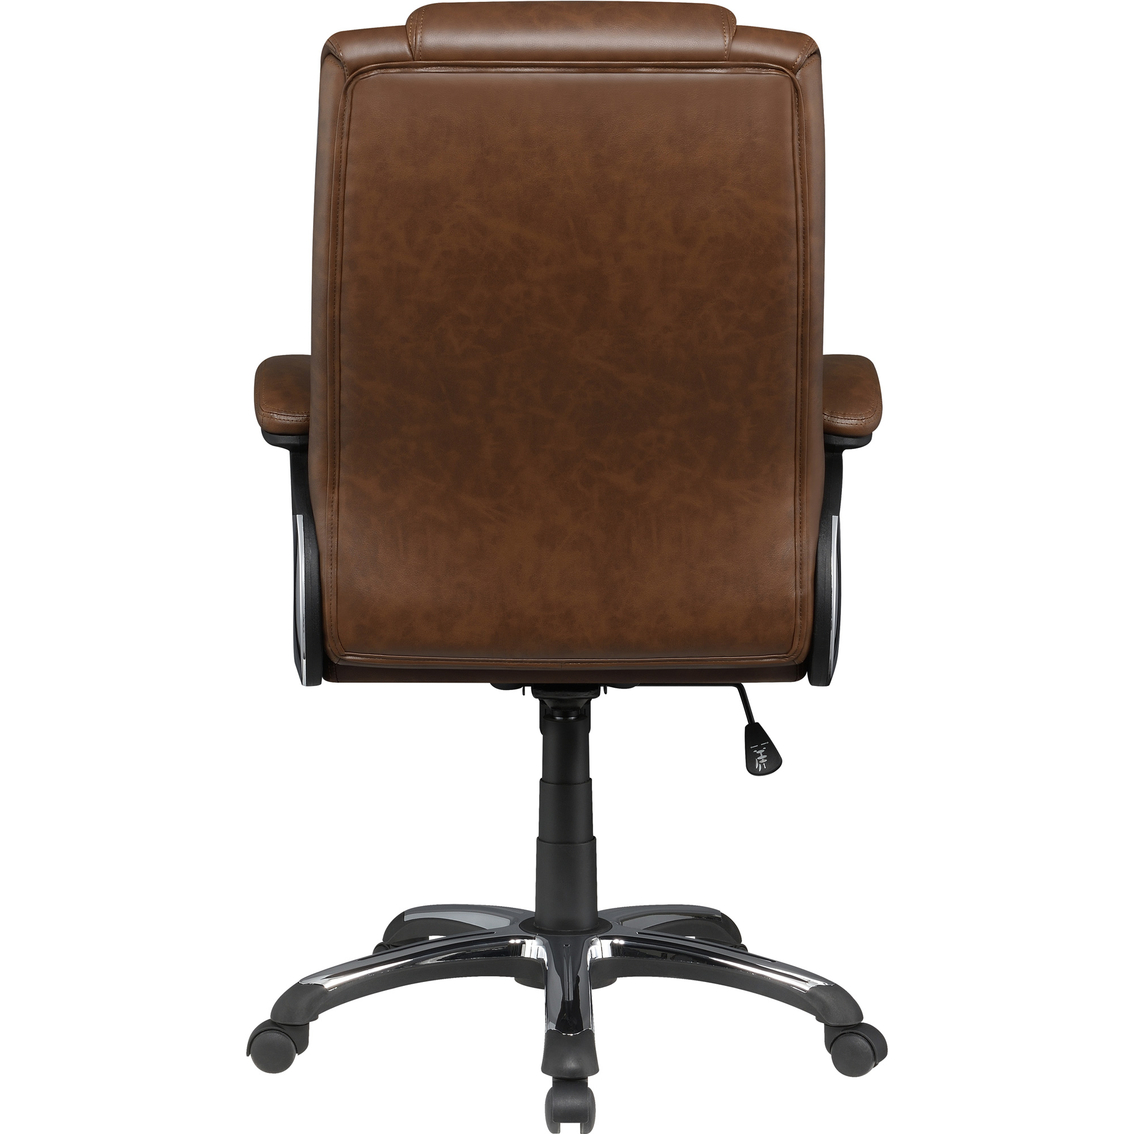 Coaster Brown Weathered Leatherette Adjustable Height Office Chair with Padded Arms - Image 2 of 6